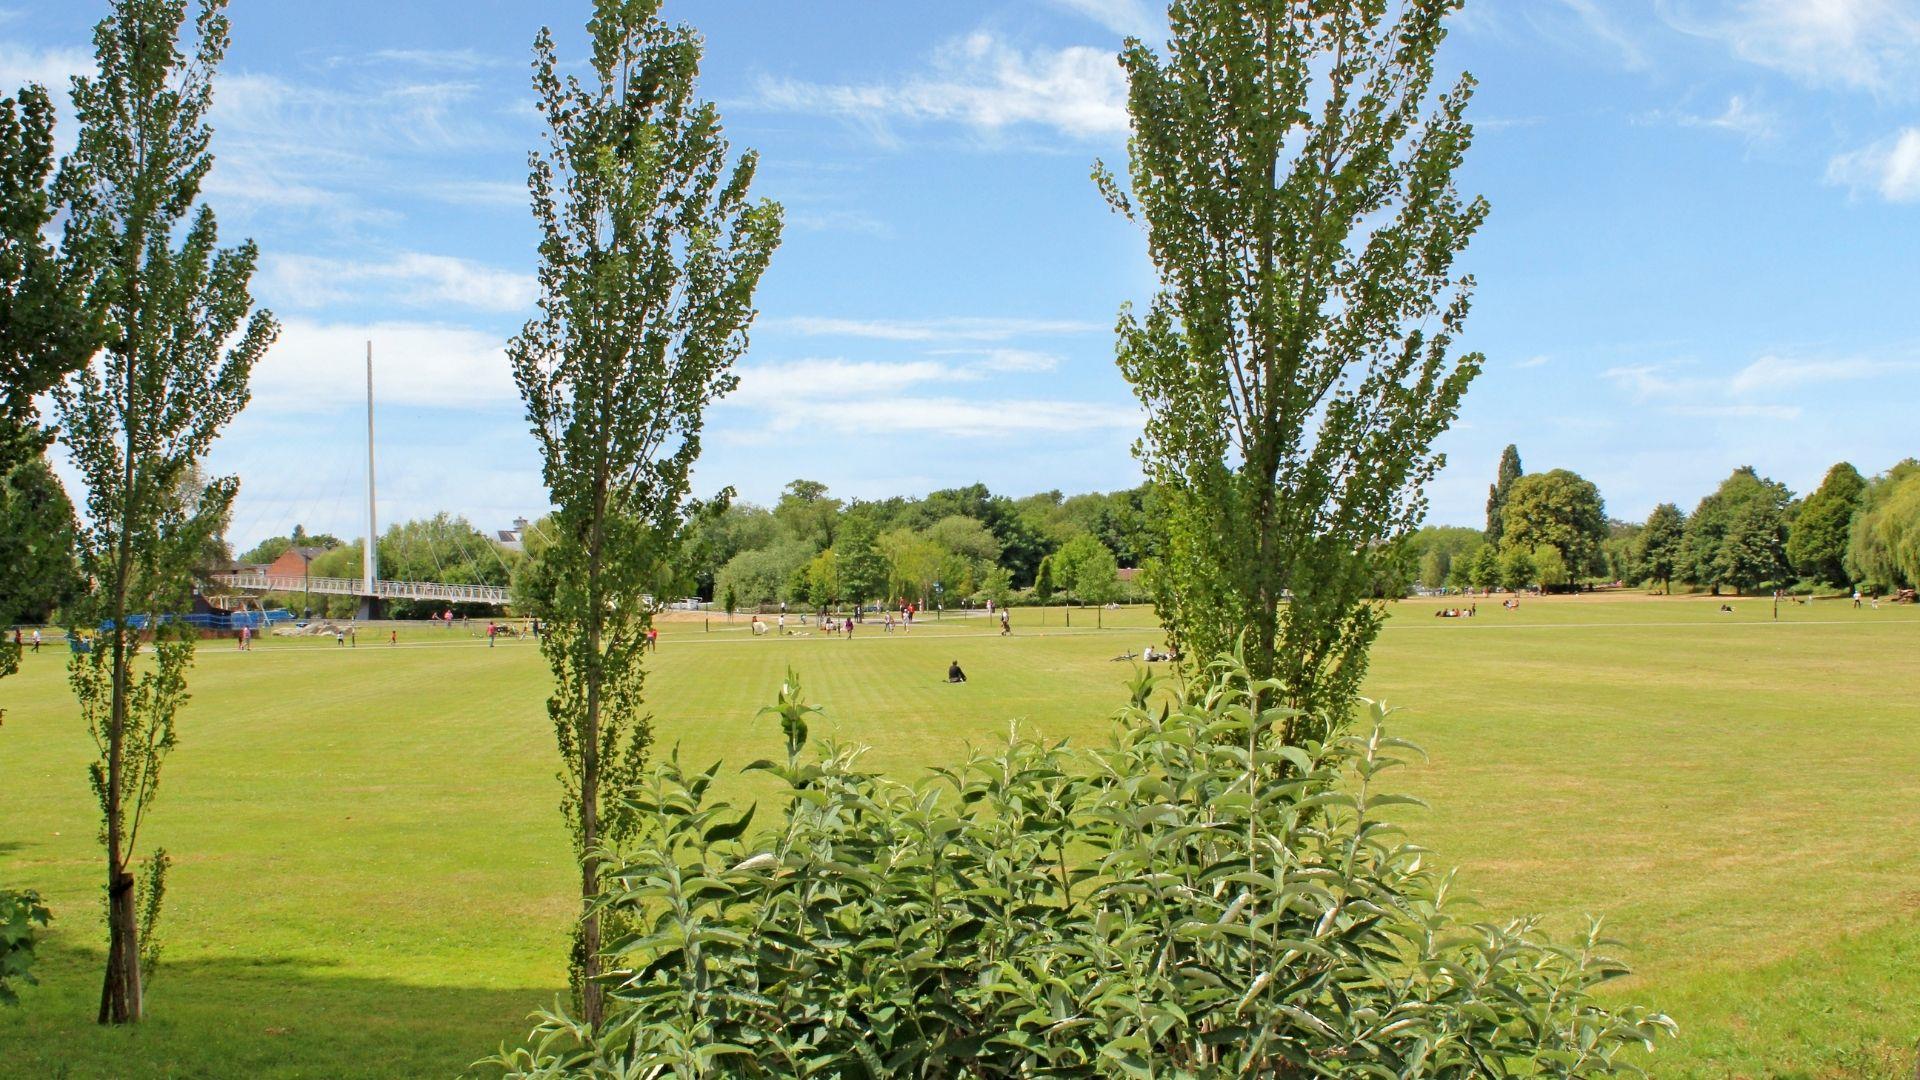 Trees at Christchurch Meadow